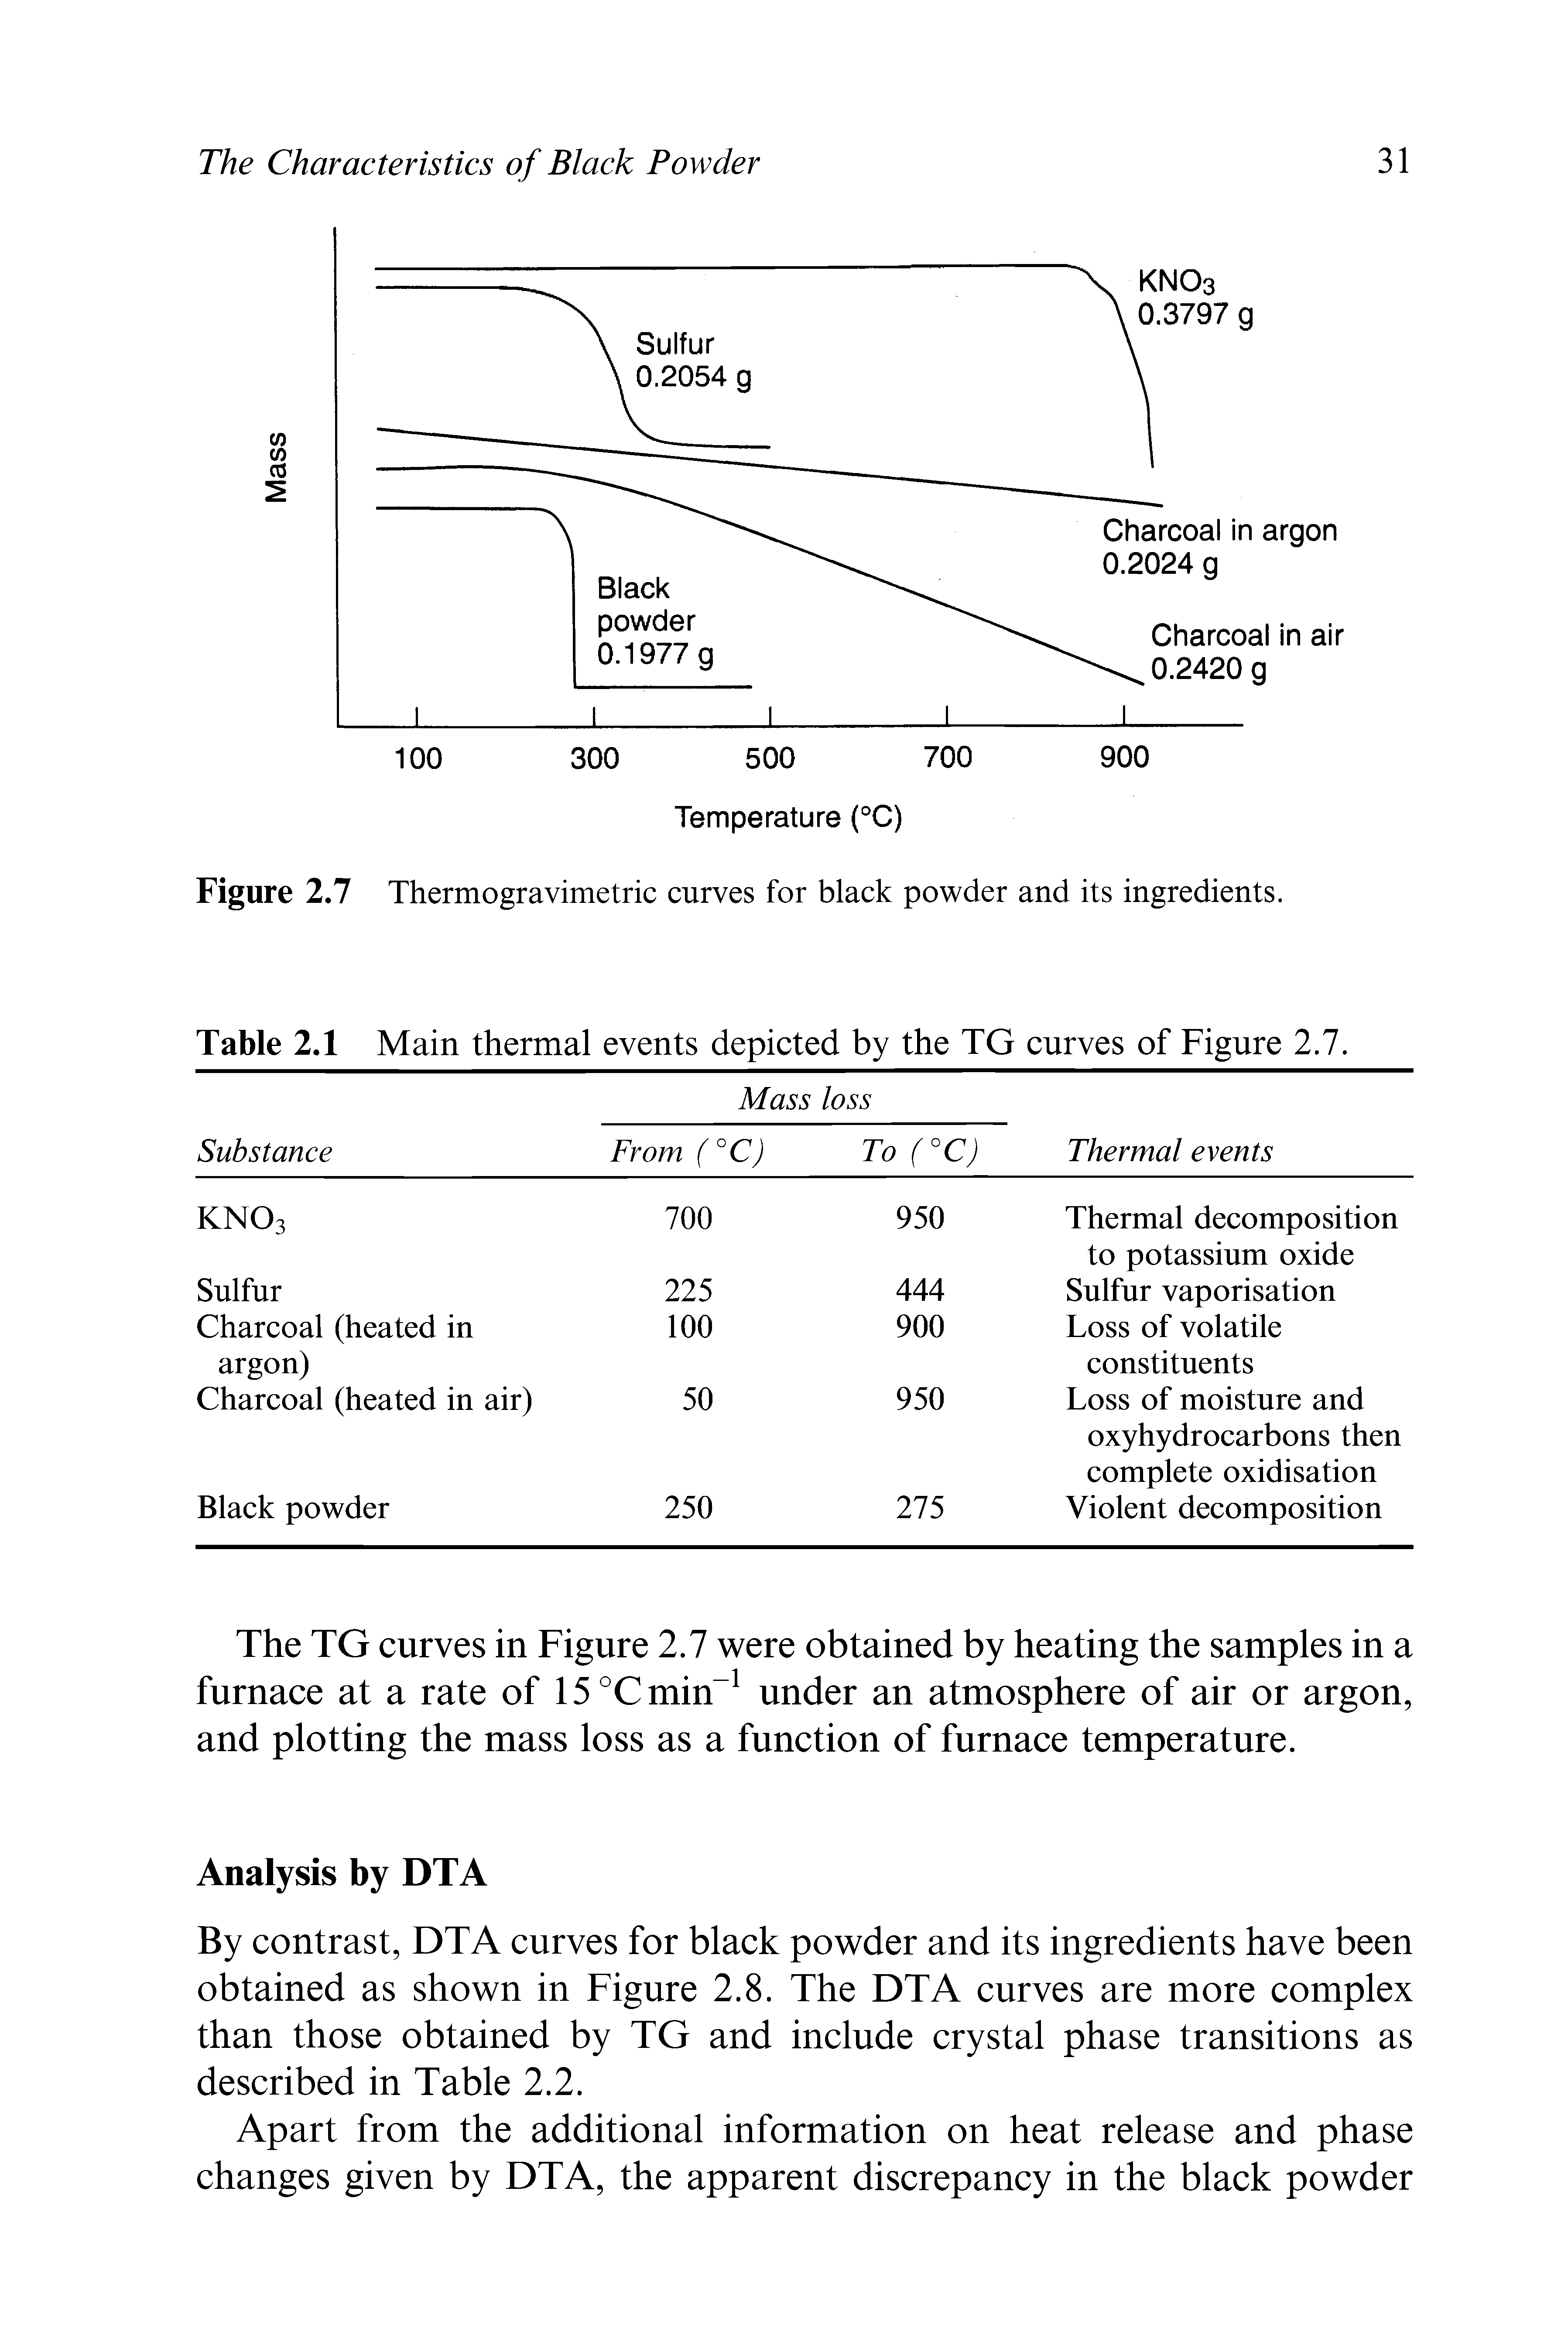 Figure 2.7 Thermogravimetric curves for black powder and its ingredients.